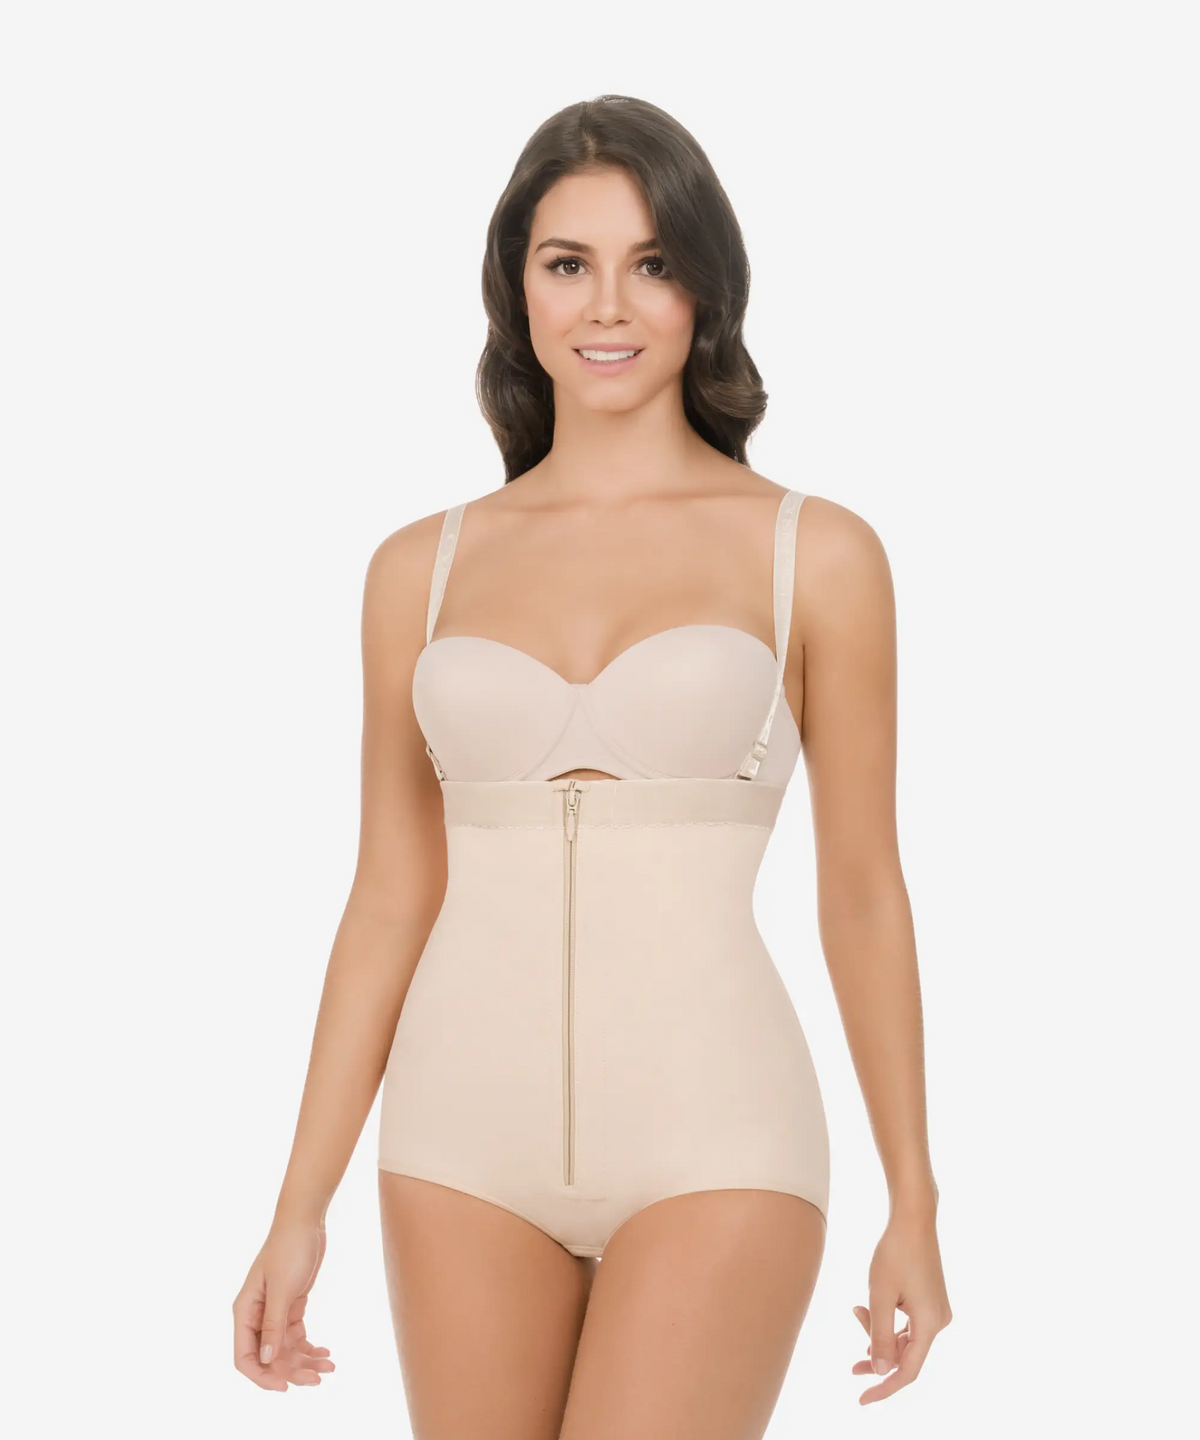 InstantFigure Women's Firm Control Shaping Strapless Bandeau Body Brief  Bodysuit 